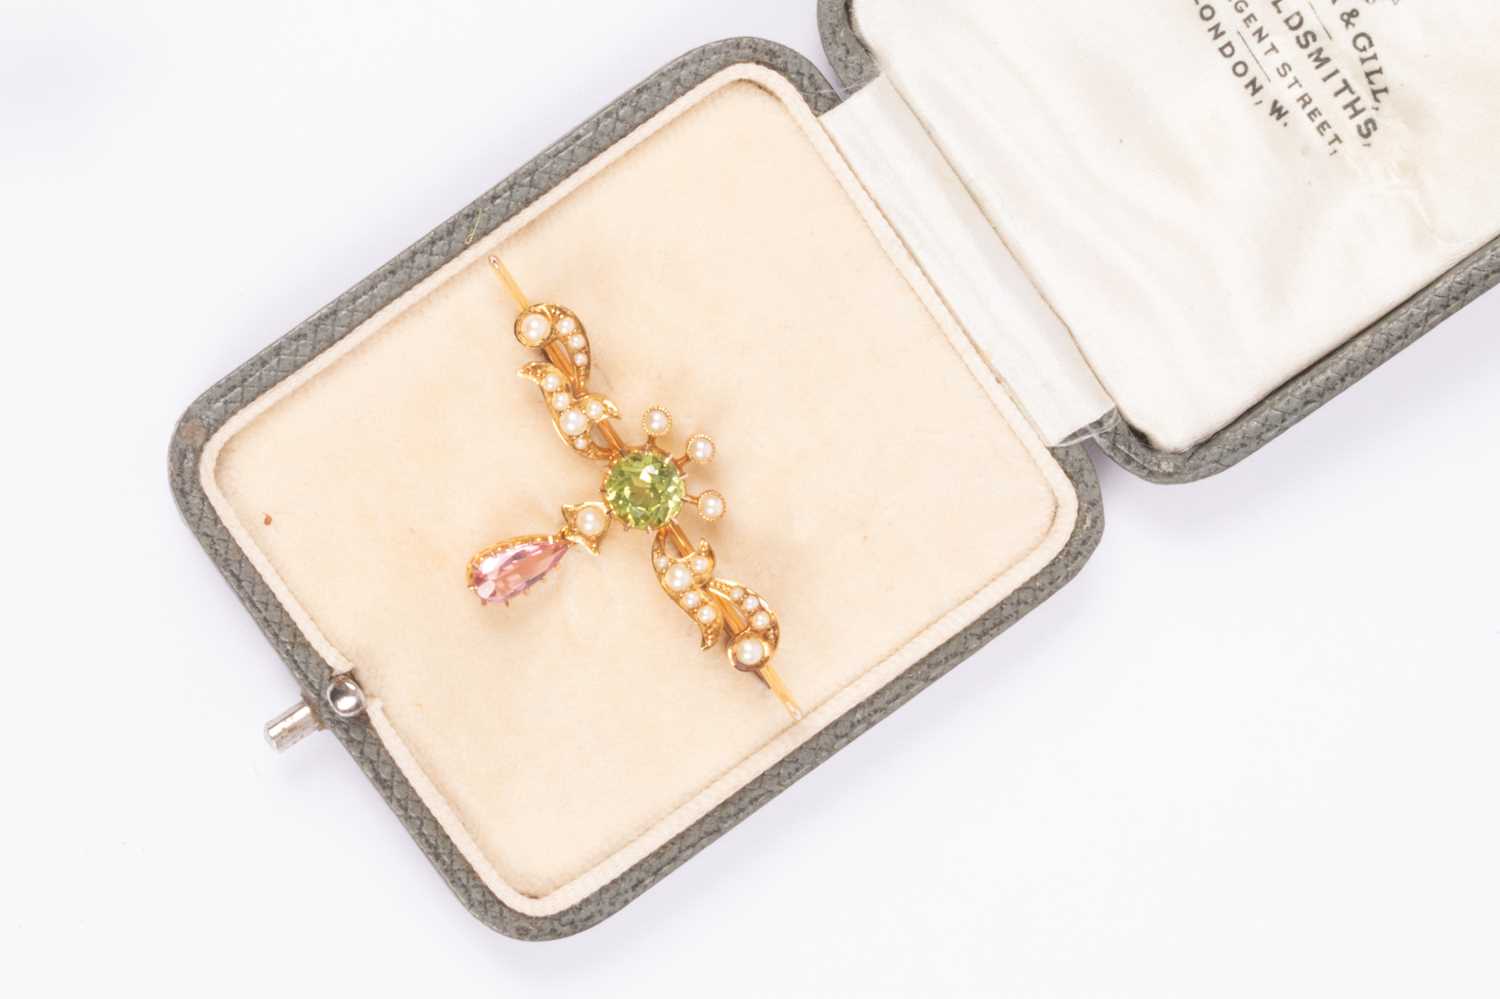 An Edwardian Suffragette style 15ct yellow gold peridot, pink tourmaline and seed pearl bar brooch - Image 4 of 5